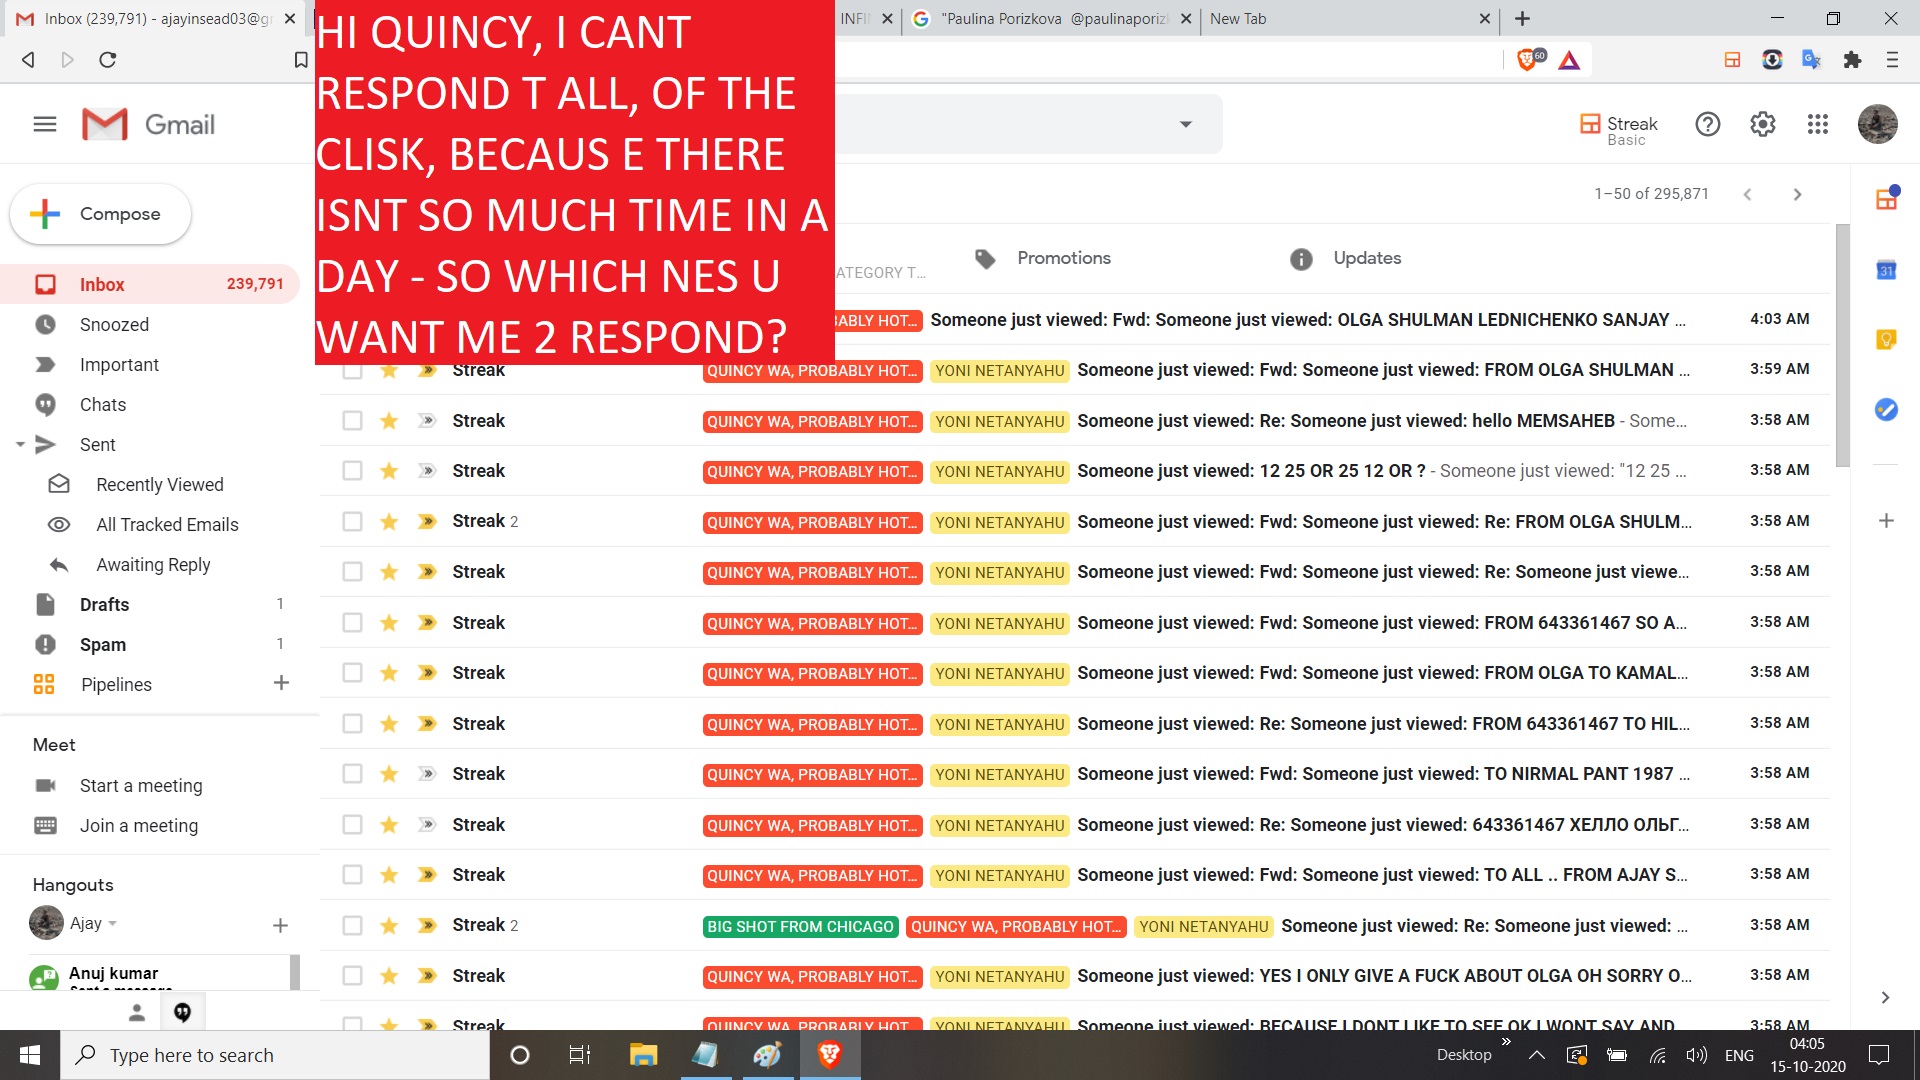 HI QUINCY, I CANT RESPOND T ALL, OF THE CLISK, BECAUS ETHERE ISNT SO MUCH TIME IN A DAY - SO WHICH NES U WANT ME T RESPOND